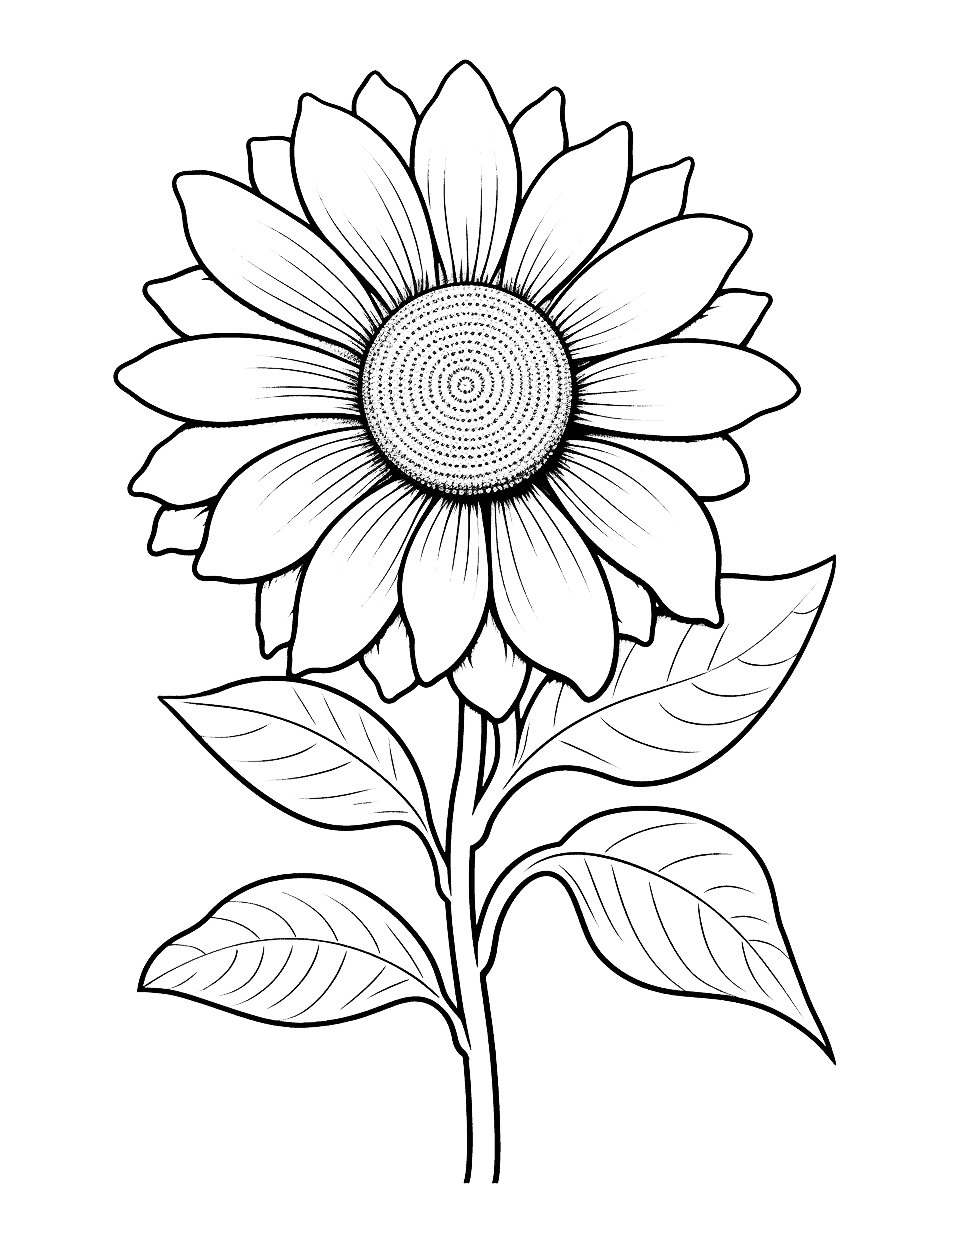 Realistic Sunflower Flower Coloring Page - An advanced, realistic drawing of a sunflower.